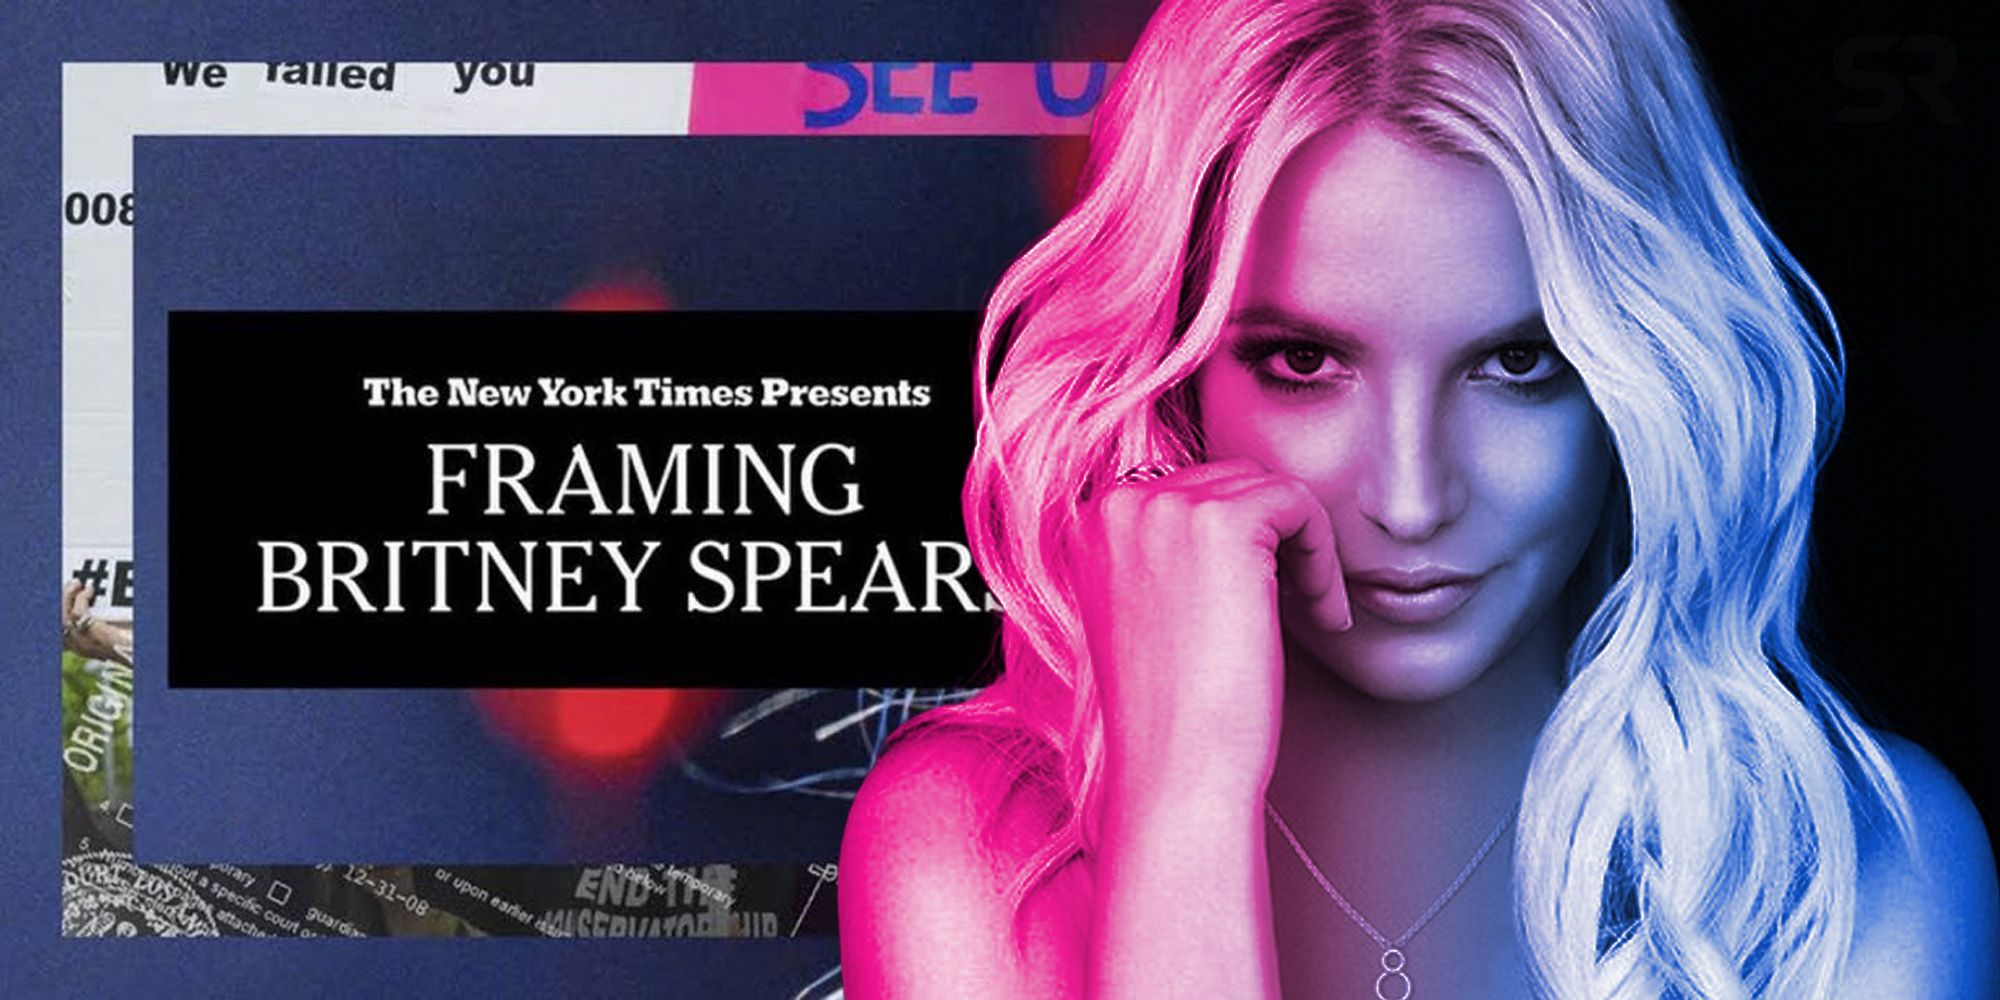 framing-britney-spears-free-britney-movie-2021-movies-i-watched